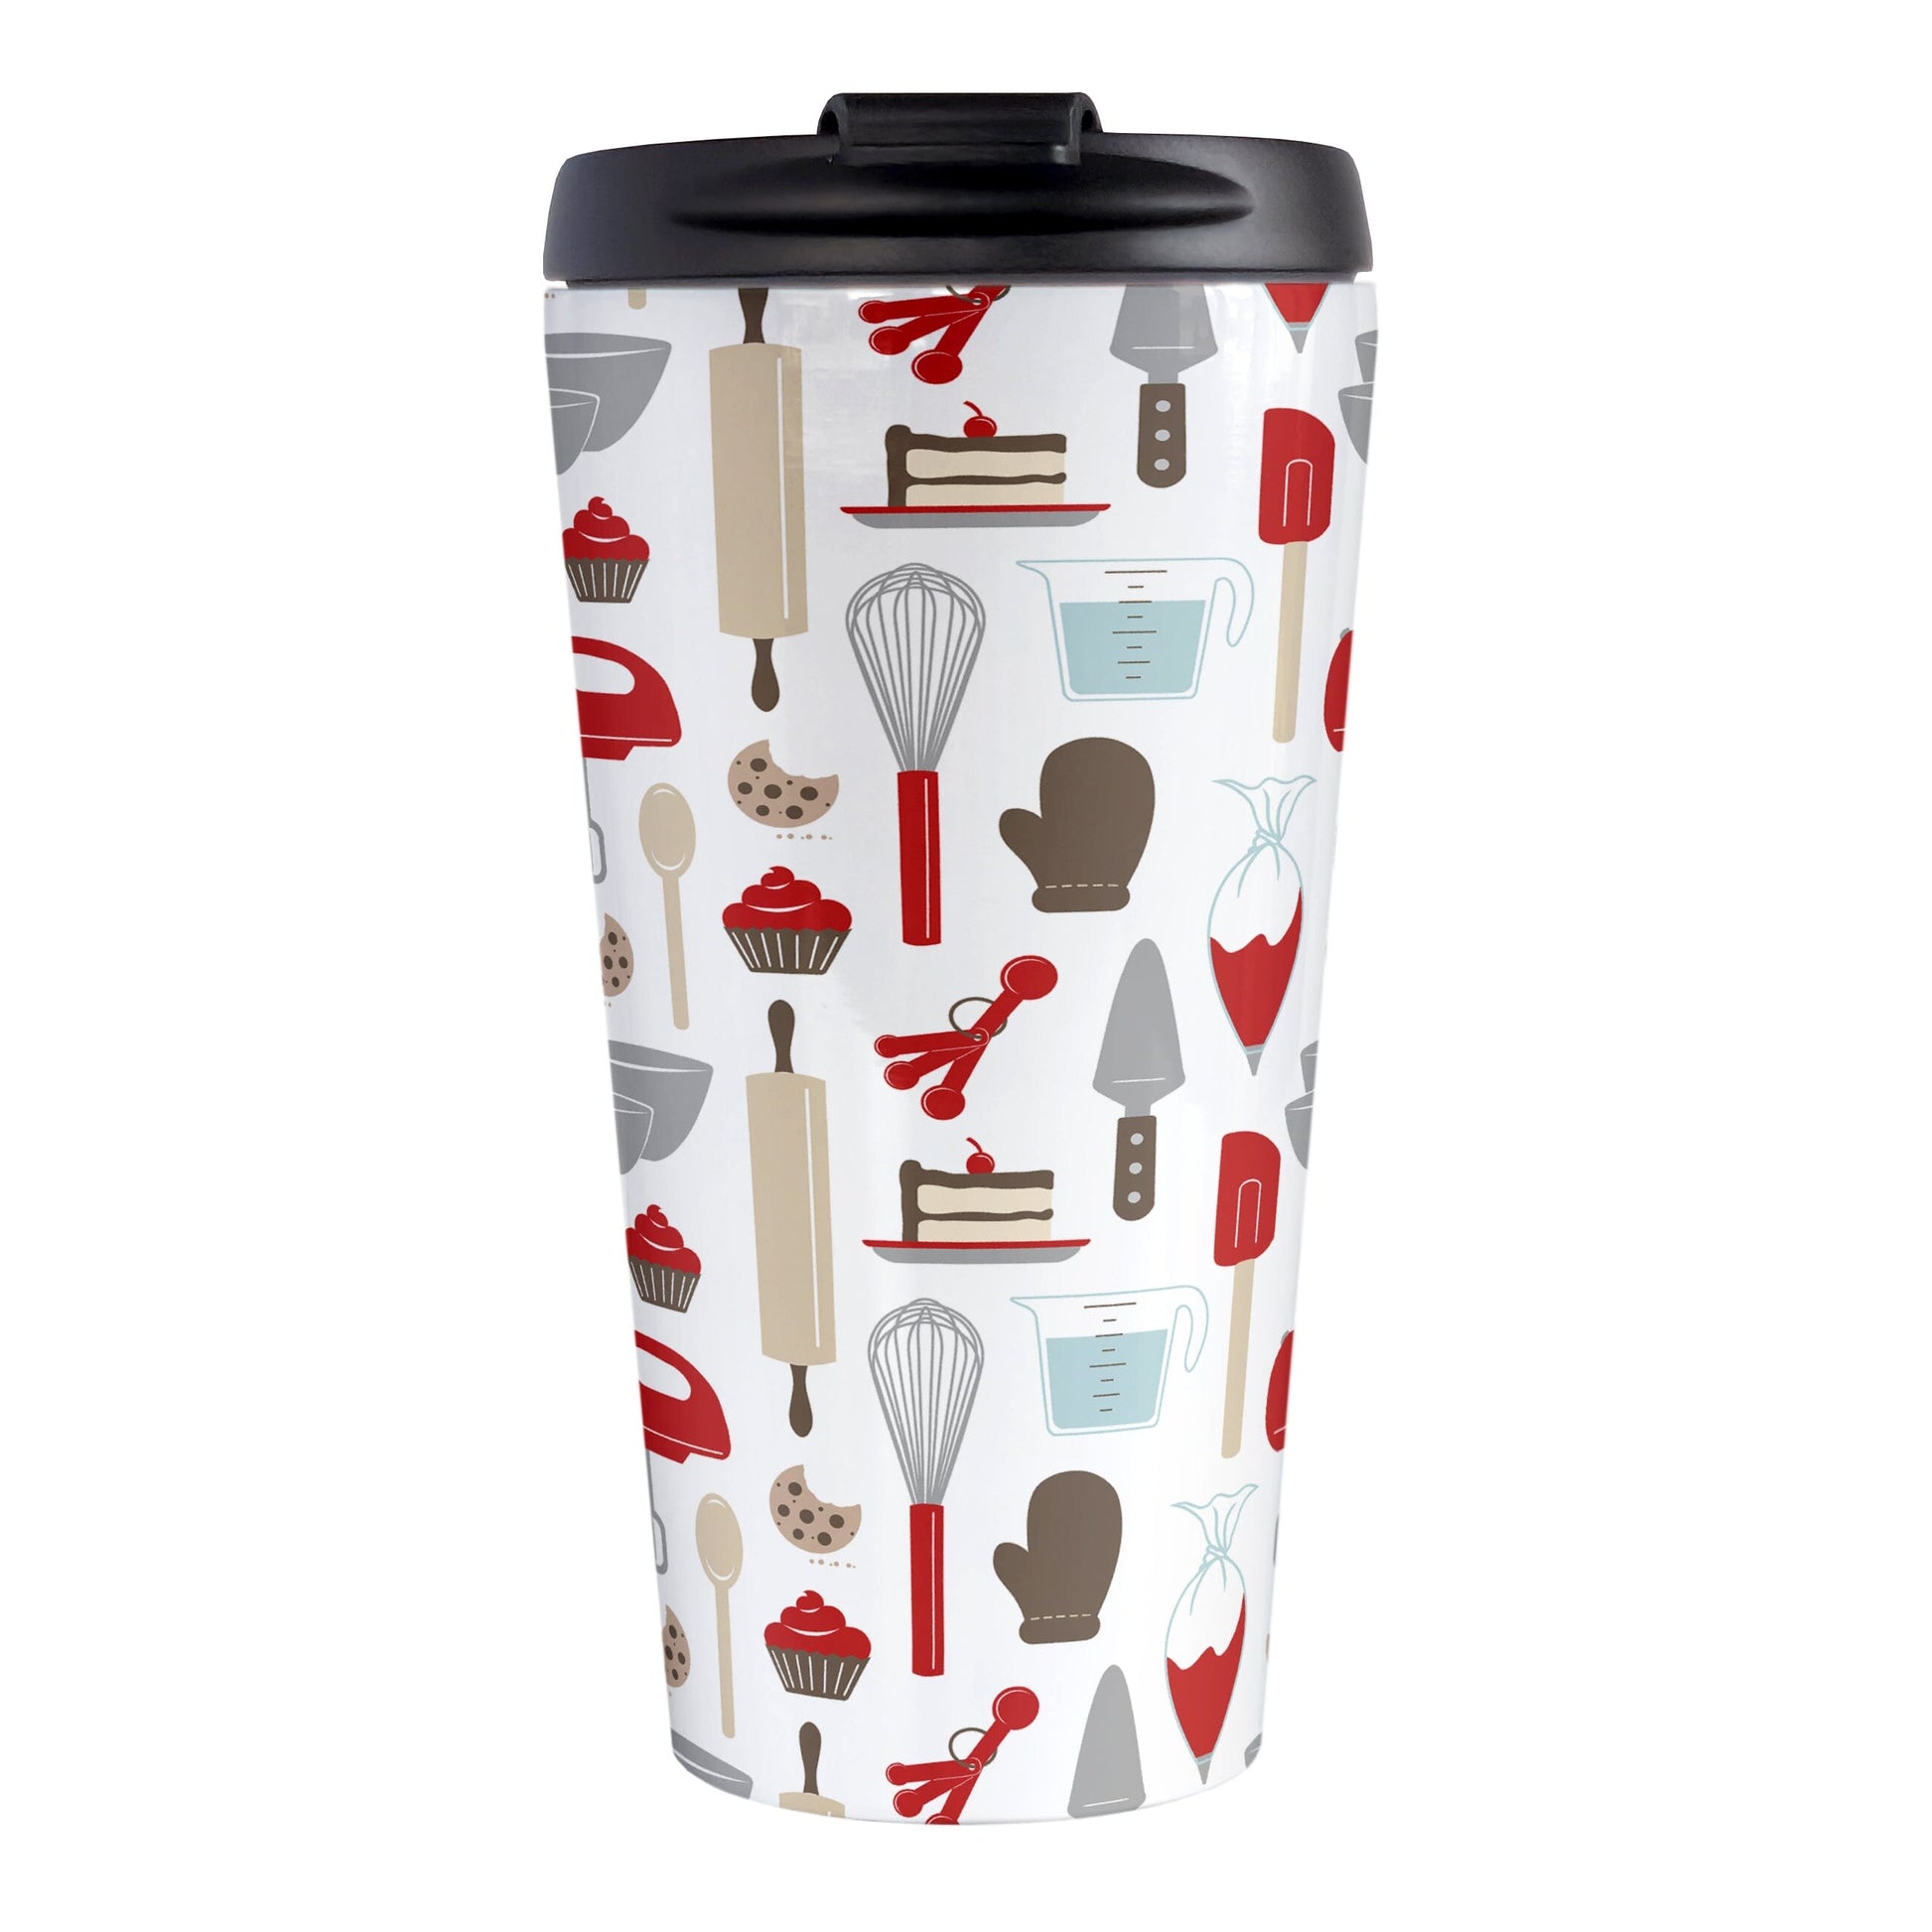 Red Baking Pattern Travel Mug (15oz) at Amy's Coffee Mugs. A stainless steel travel mug designed with a pattern of baking tools like spatulas, whisks, mixers, bowls, and spoons, with cookies, cupcakes, and cake all in a red, gray, brown, and beige color scheme that wraps around the travel mug. 